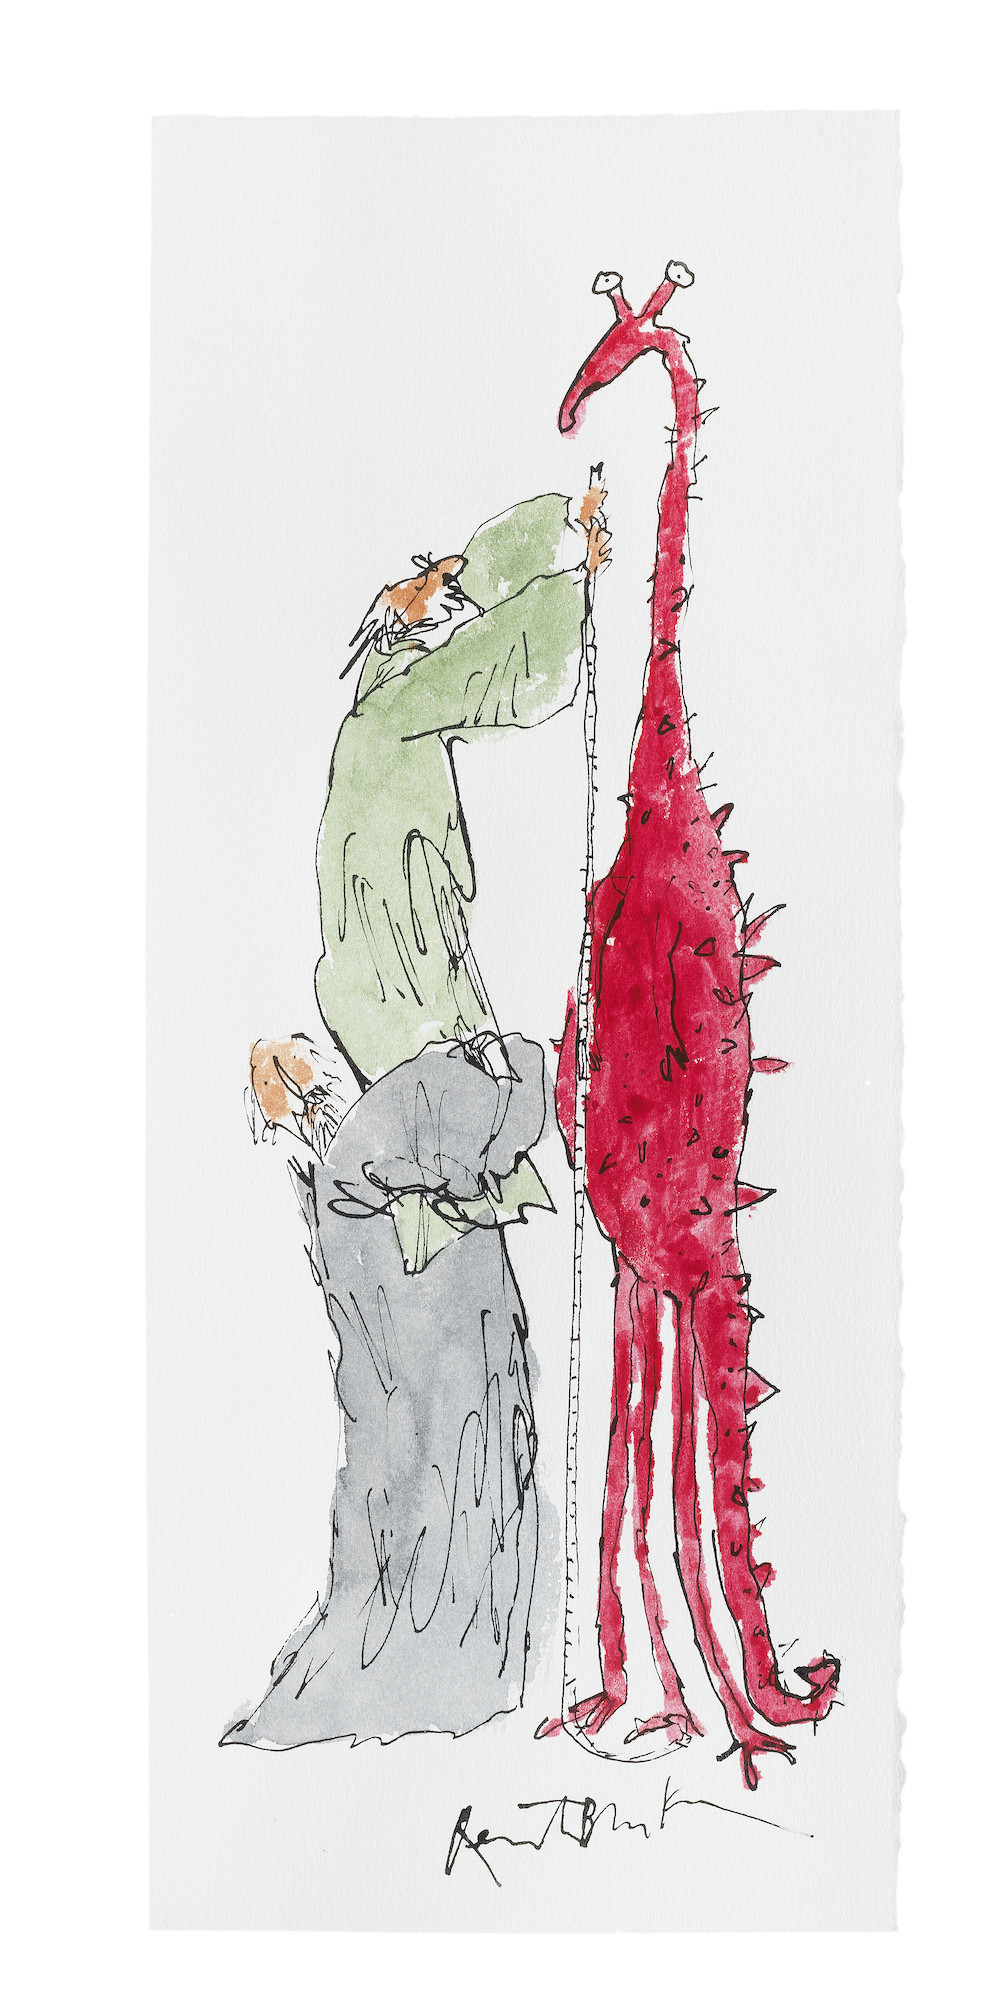 Sir Quentin Blake (British, born 1932) Measuring a Dragon No.1 (unframed) (Executed in 2022)